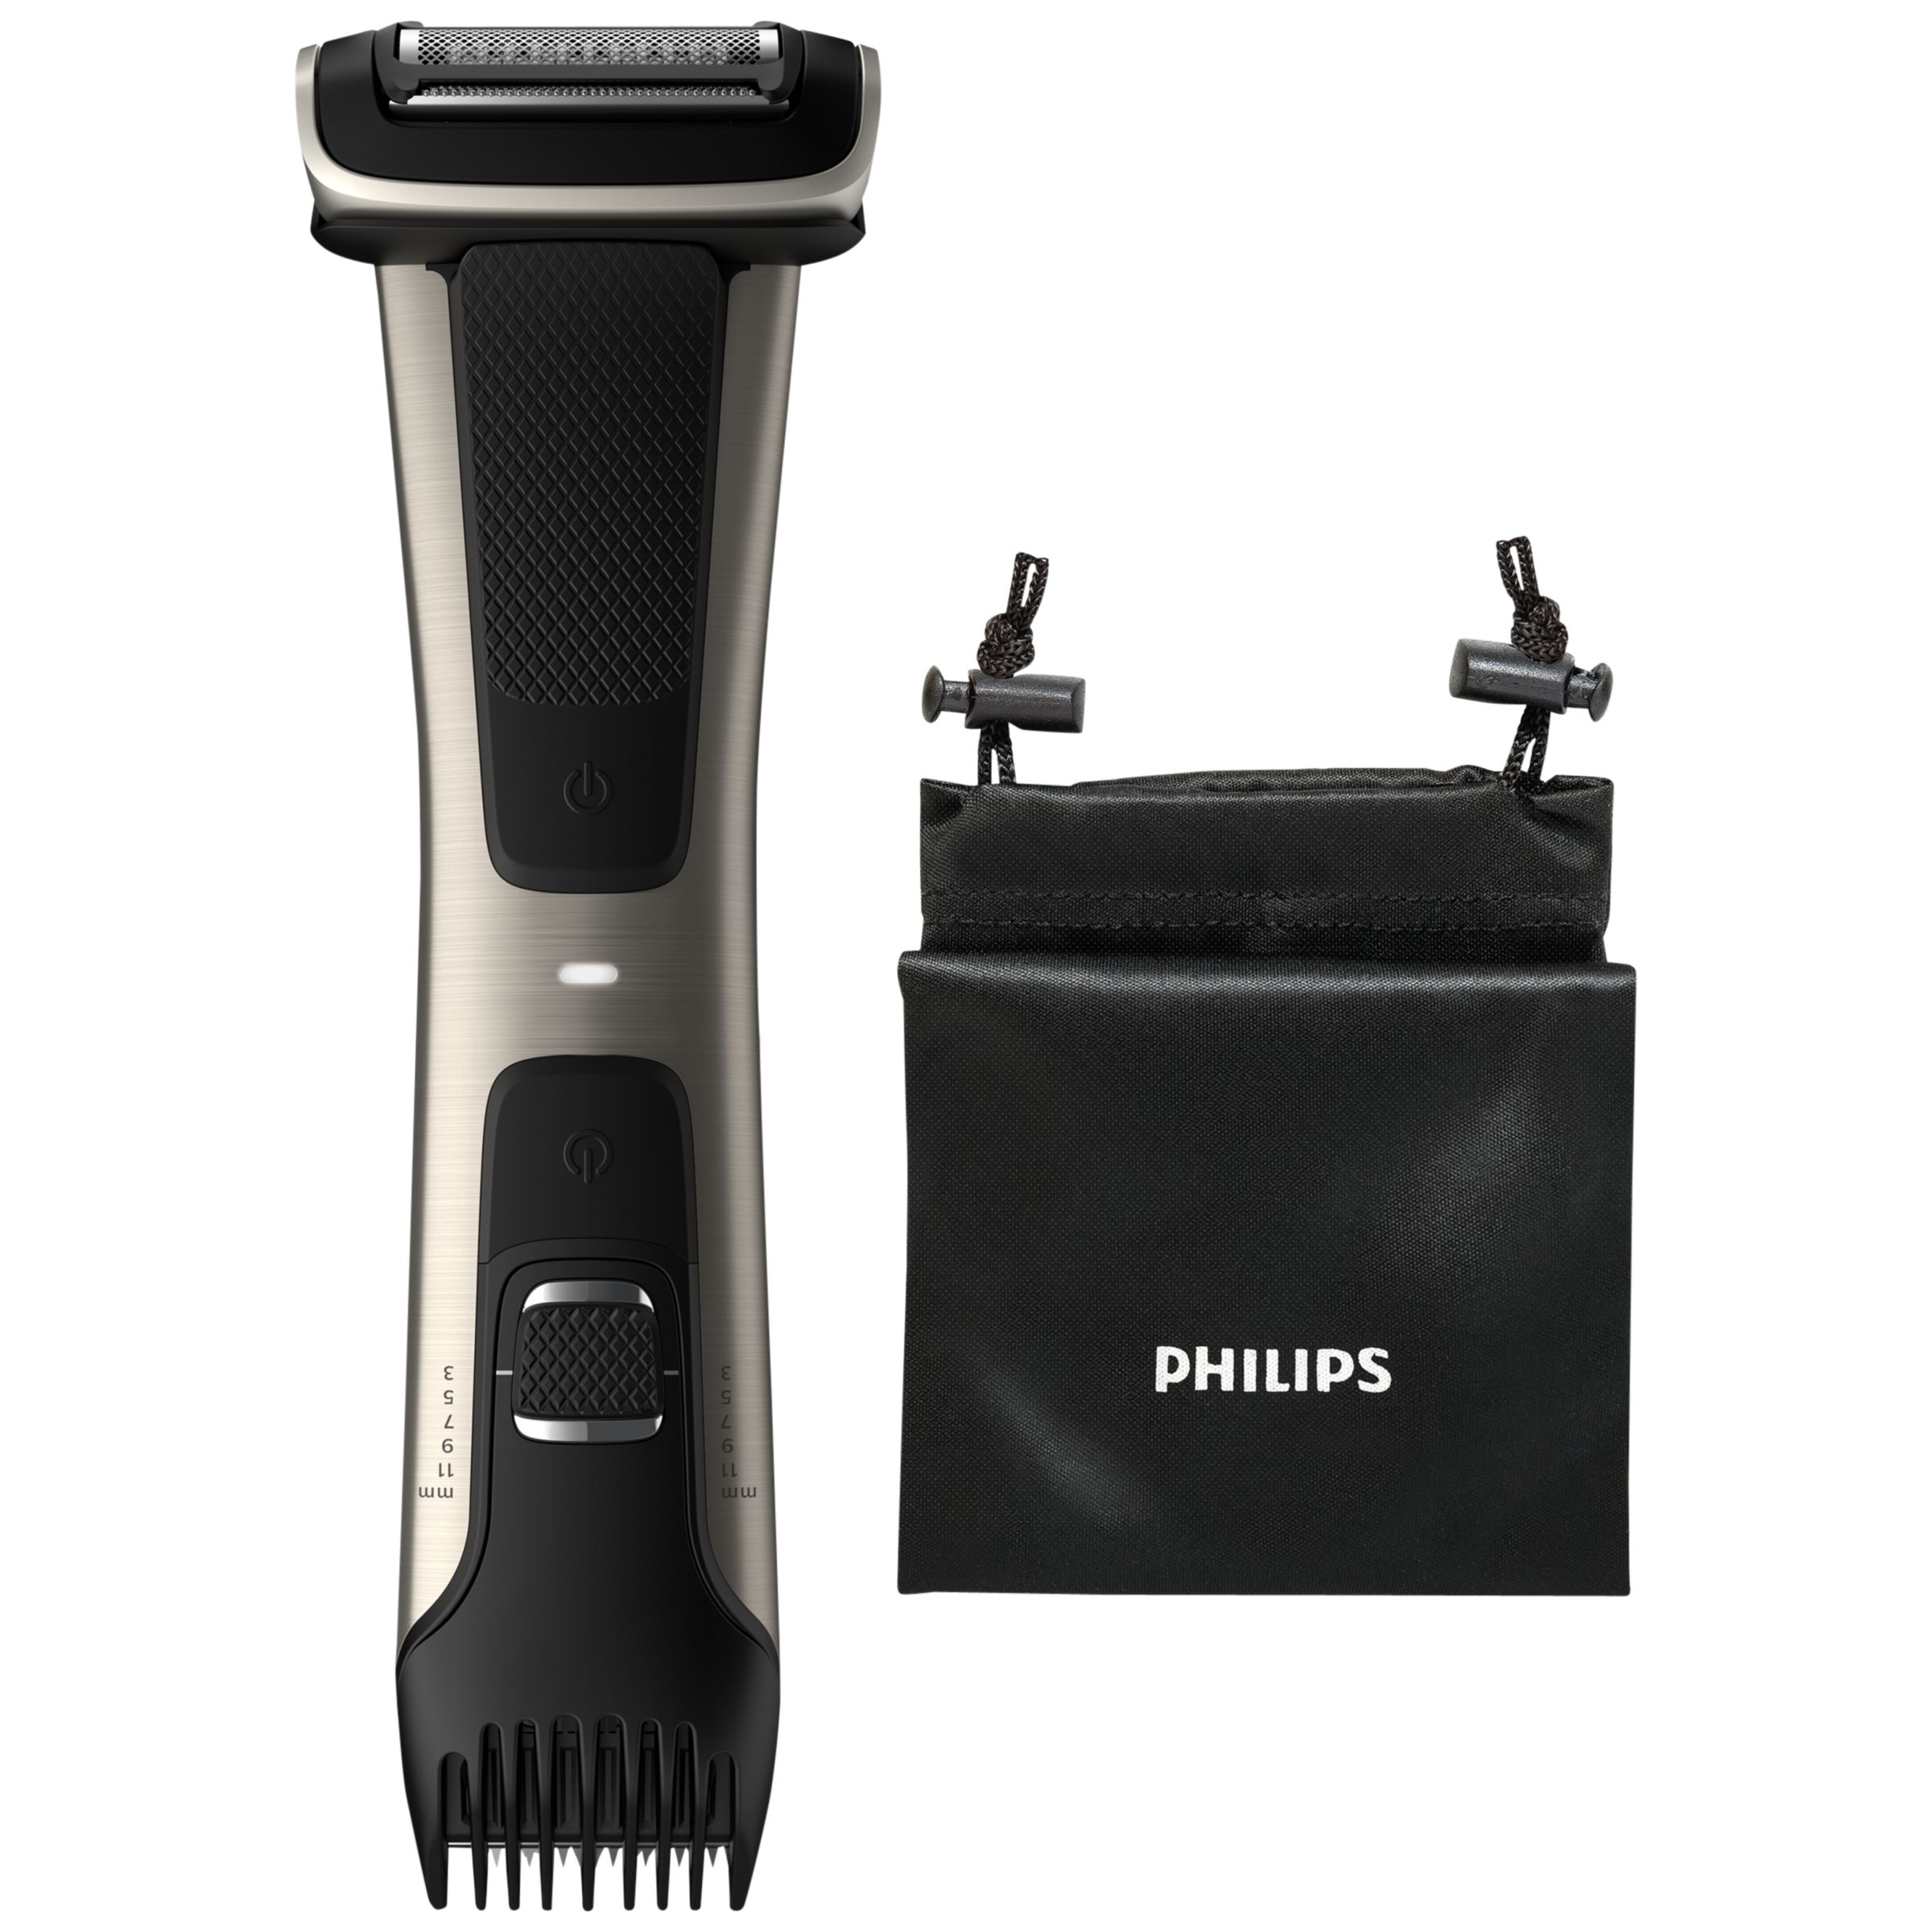 phillips body shave